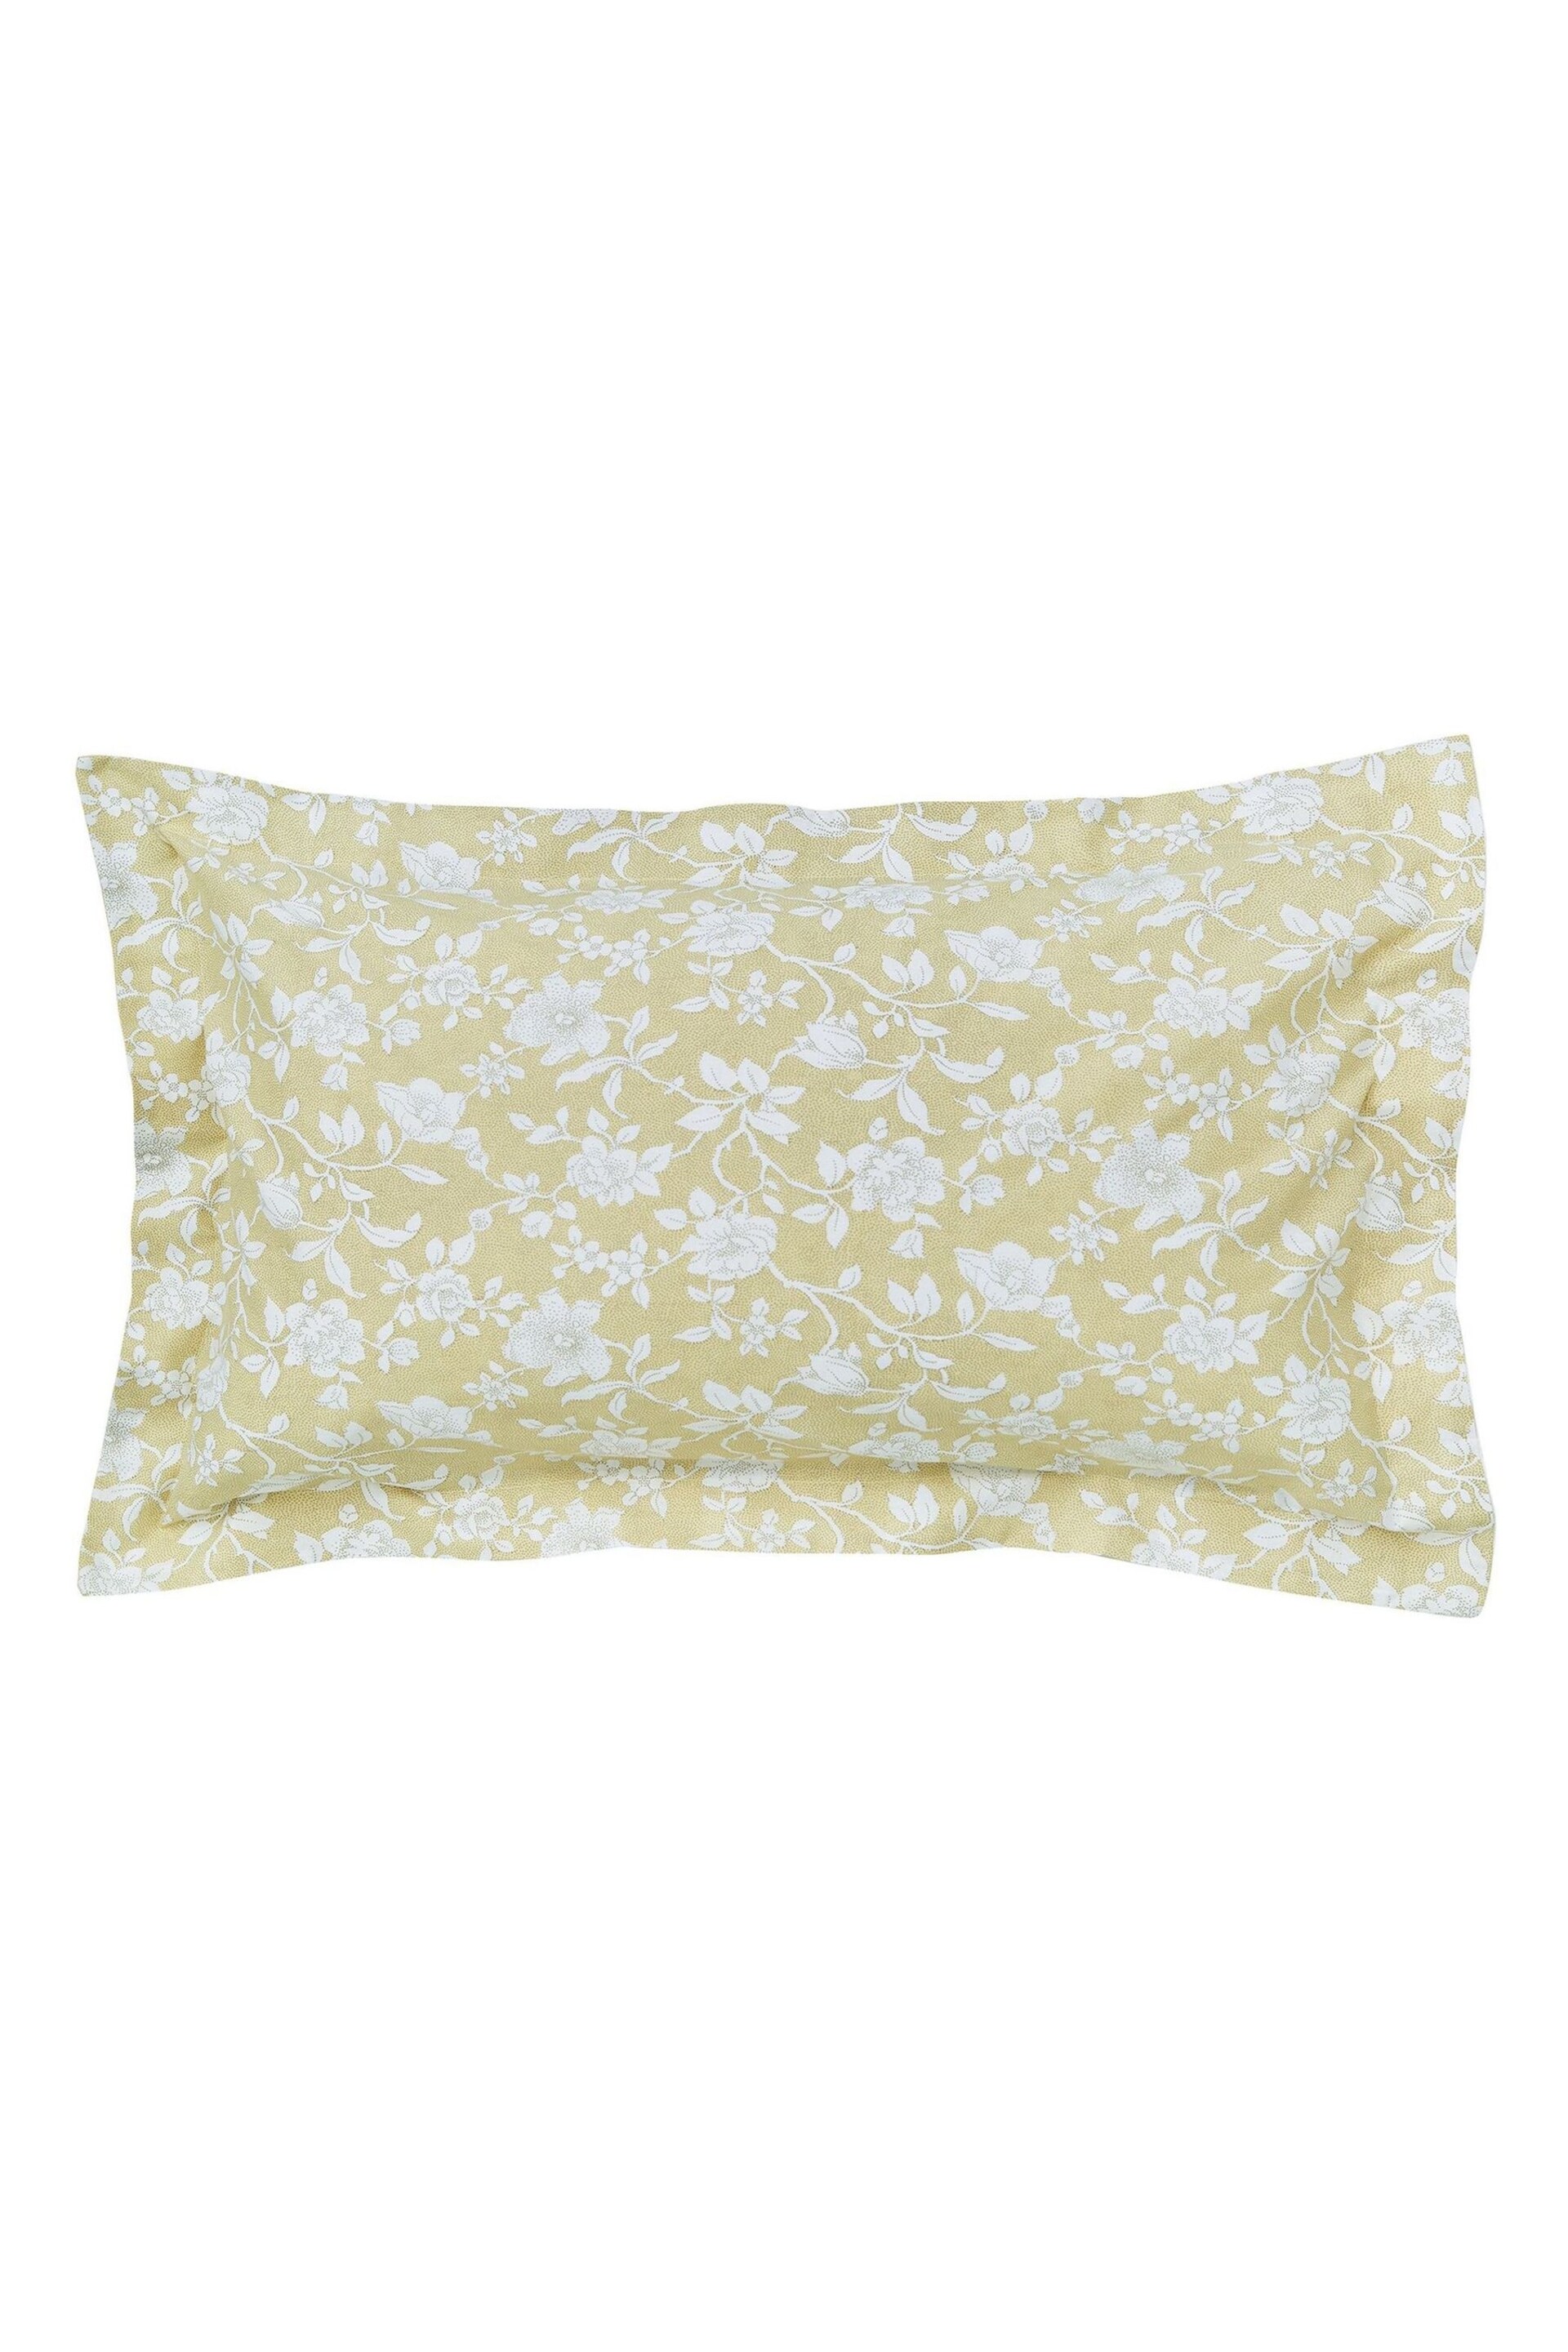 Helena Springfield Yellow Melforde Duvet Cover and Pillowcase Set - Image 3 of 4